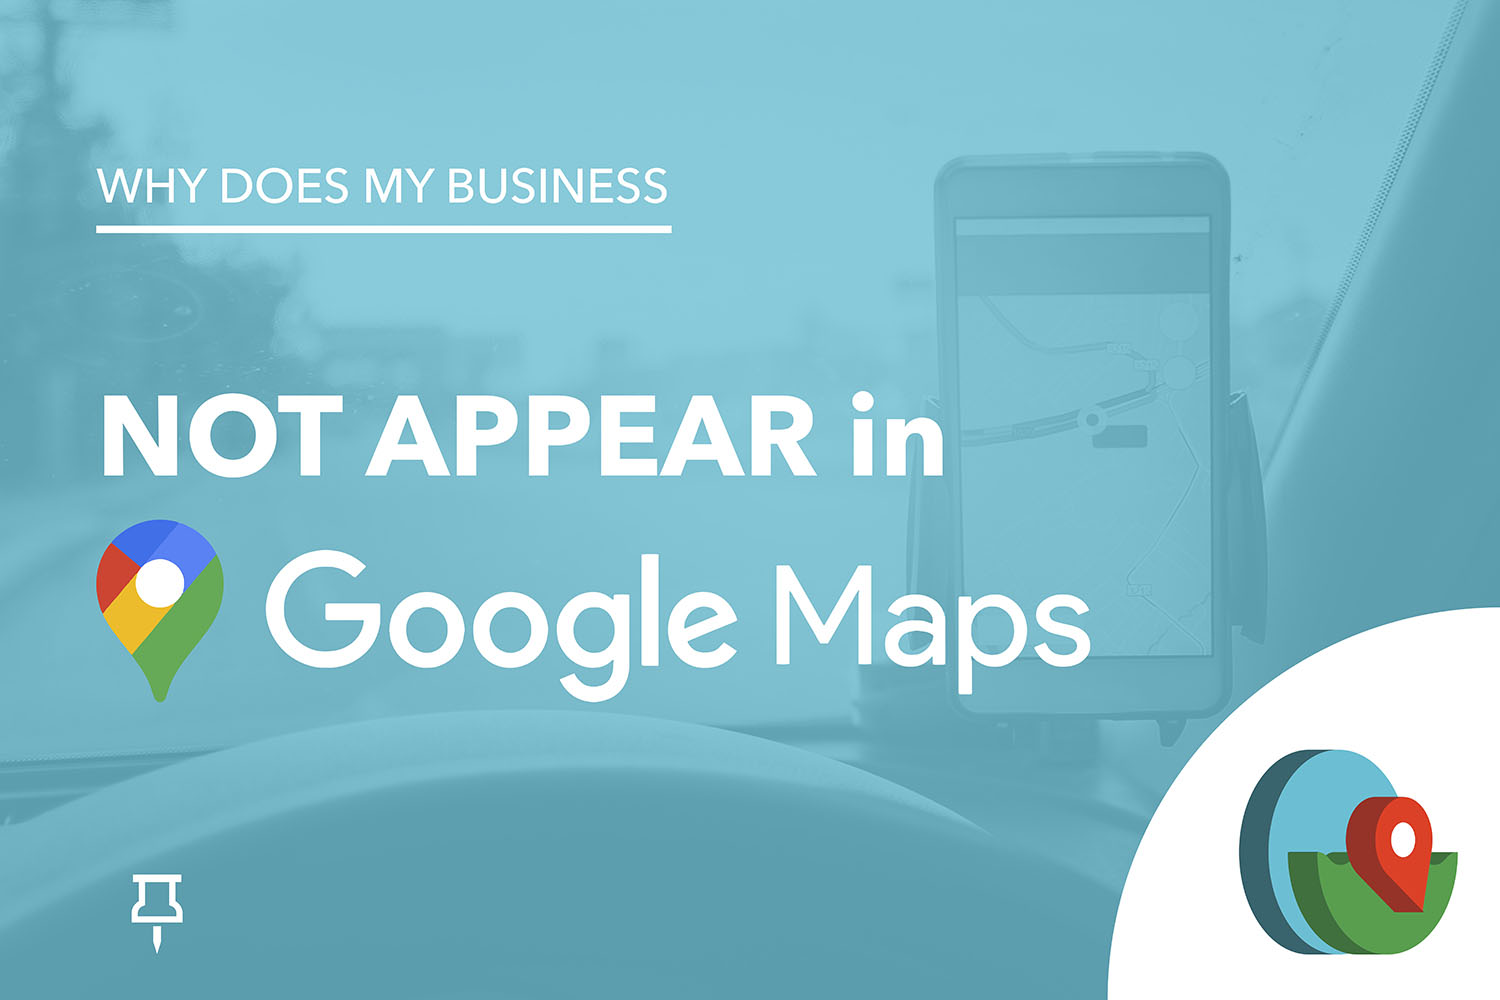 Why isn't my business appearing in Google Maps?